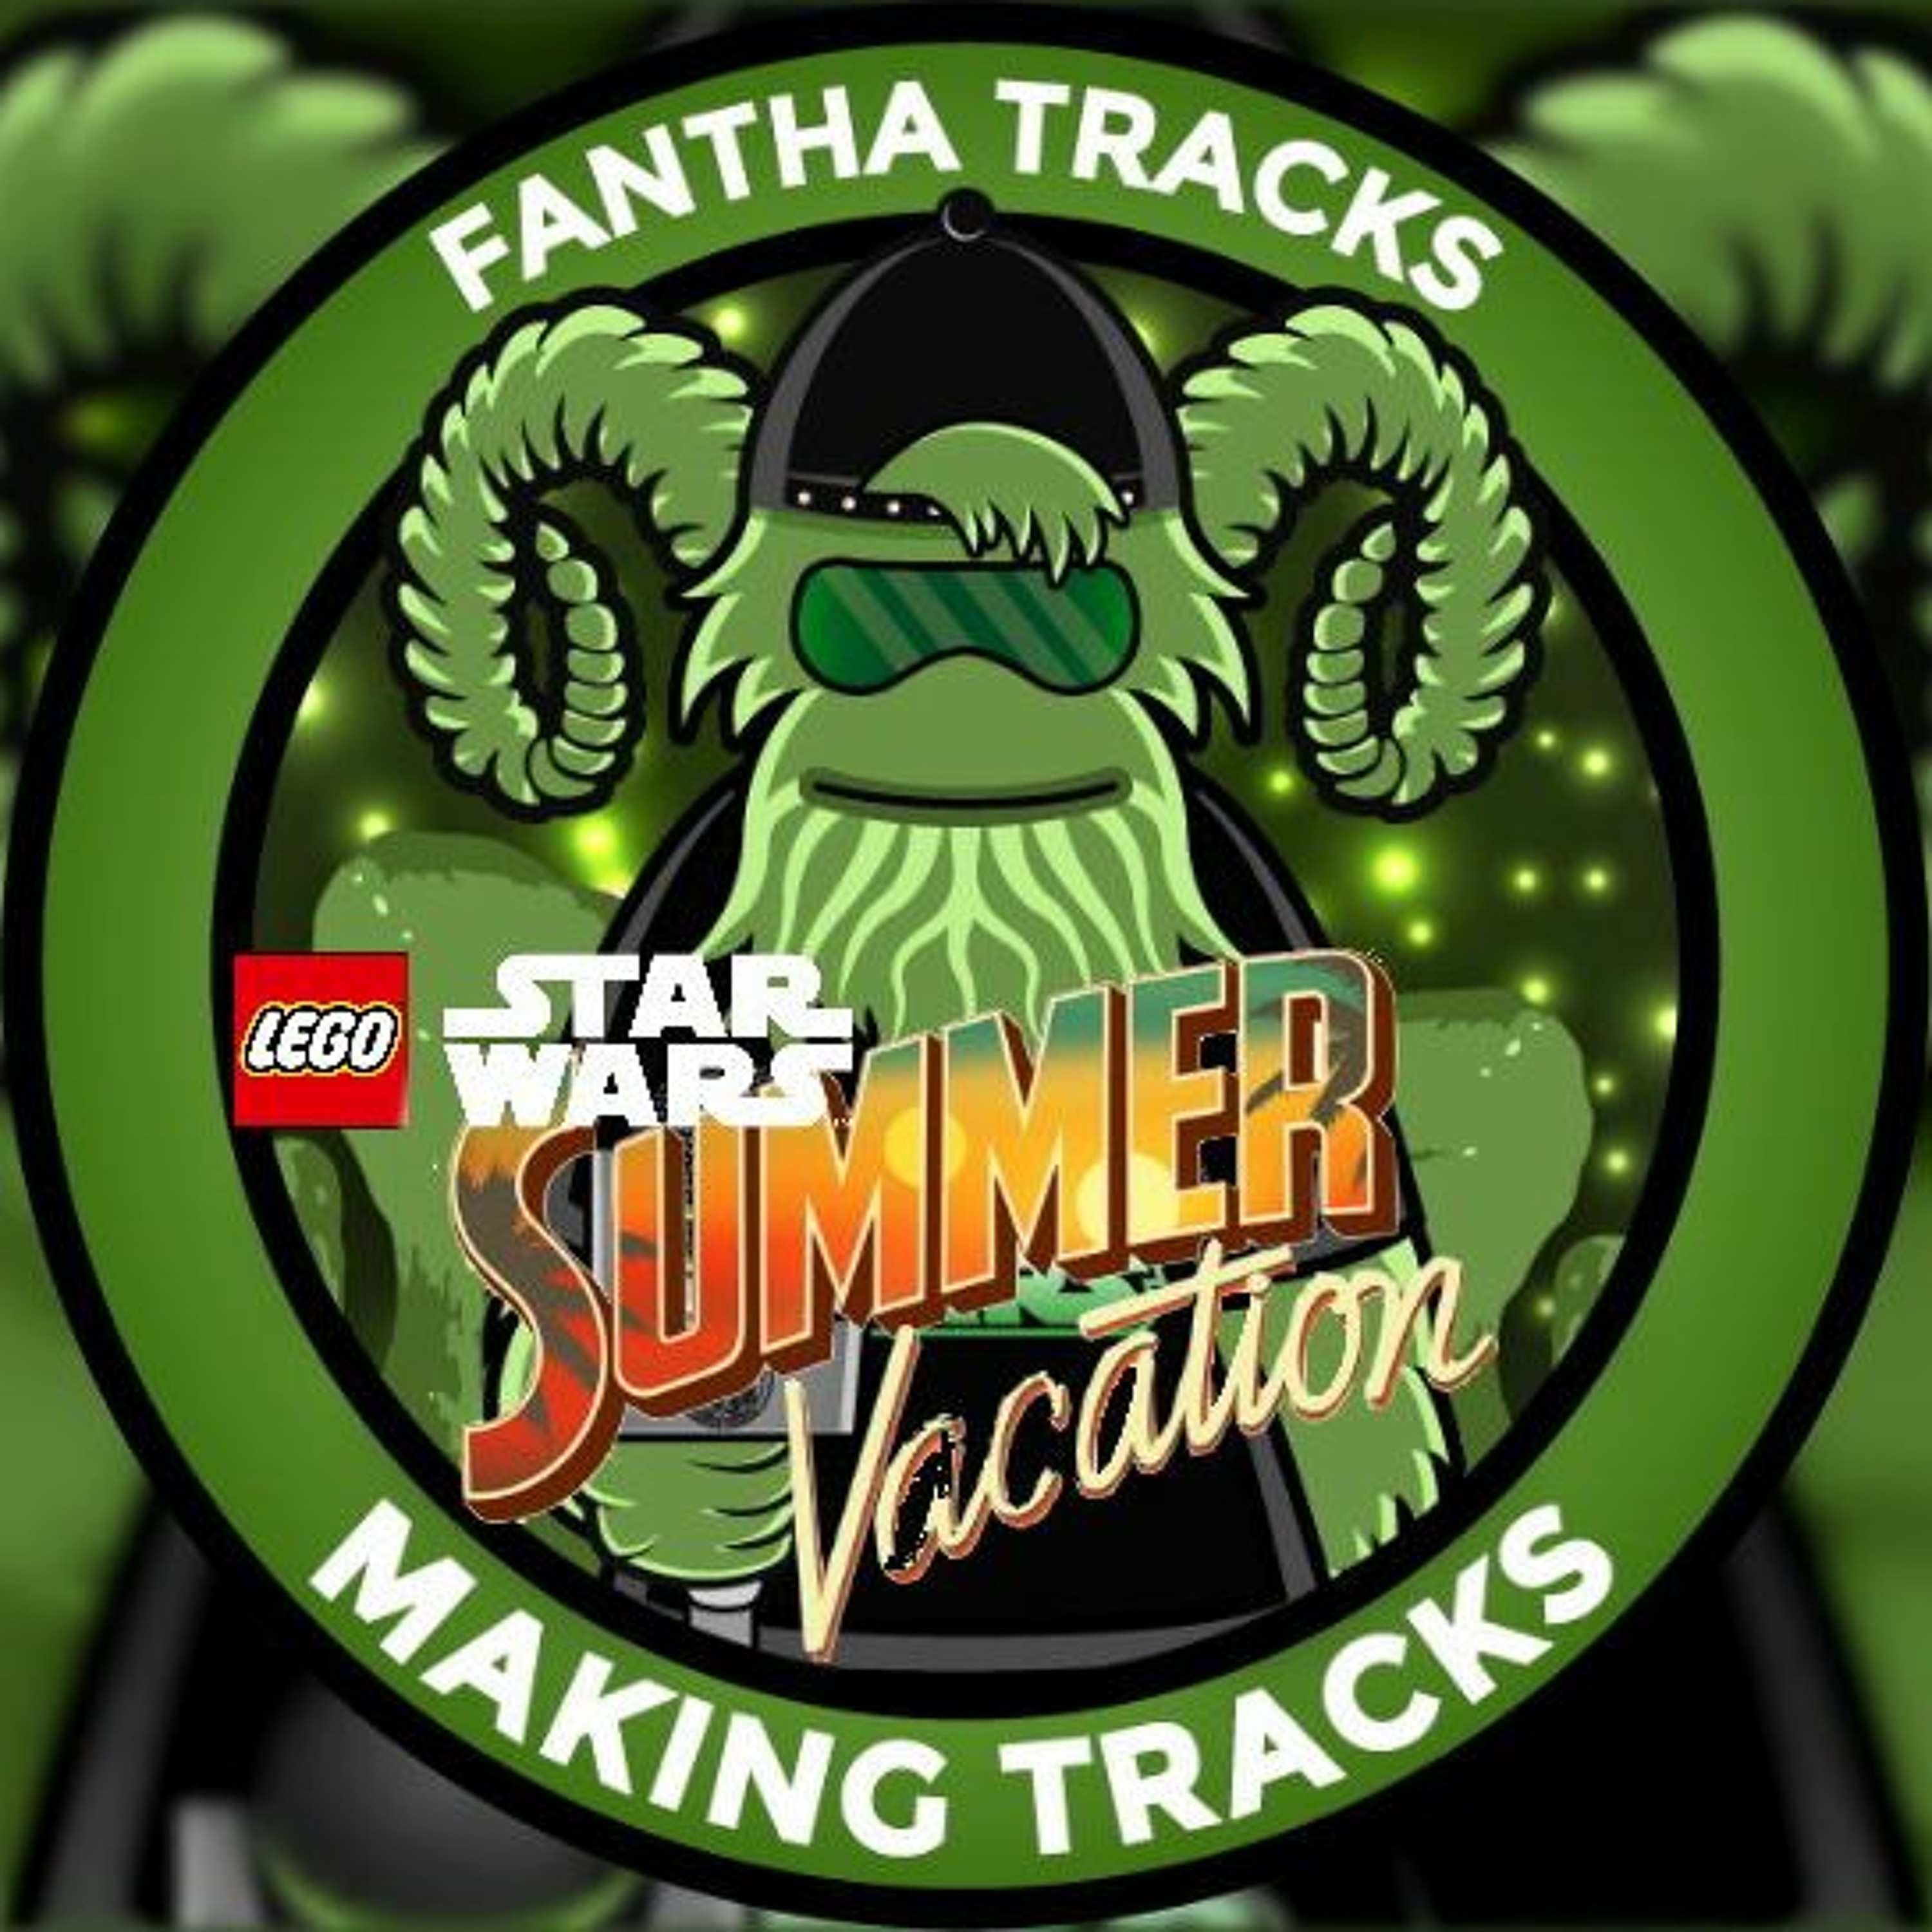 Making Tracks: LEGO Star Wars Summer Vacation: With our guests Ken Cunningham and David Shayne